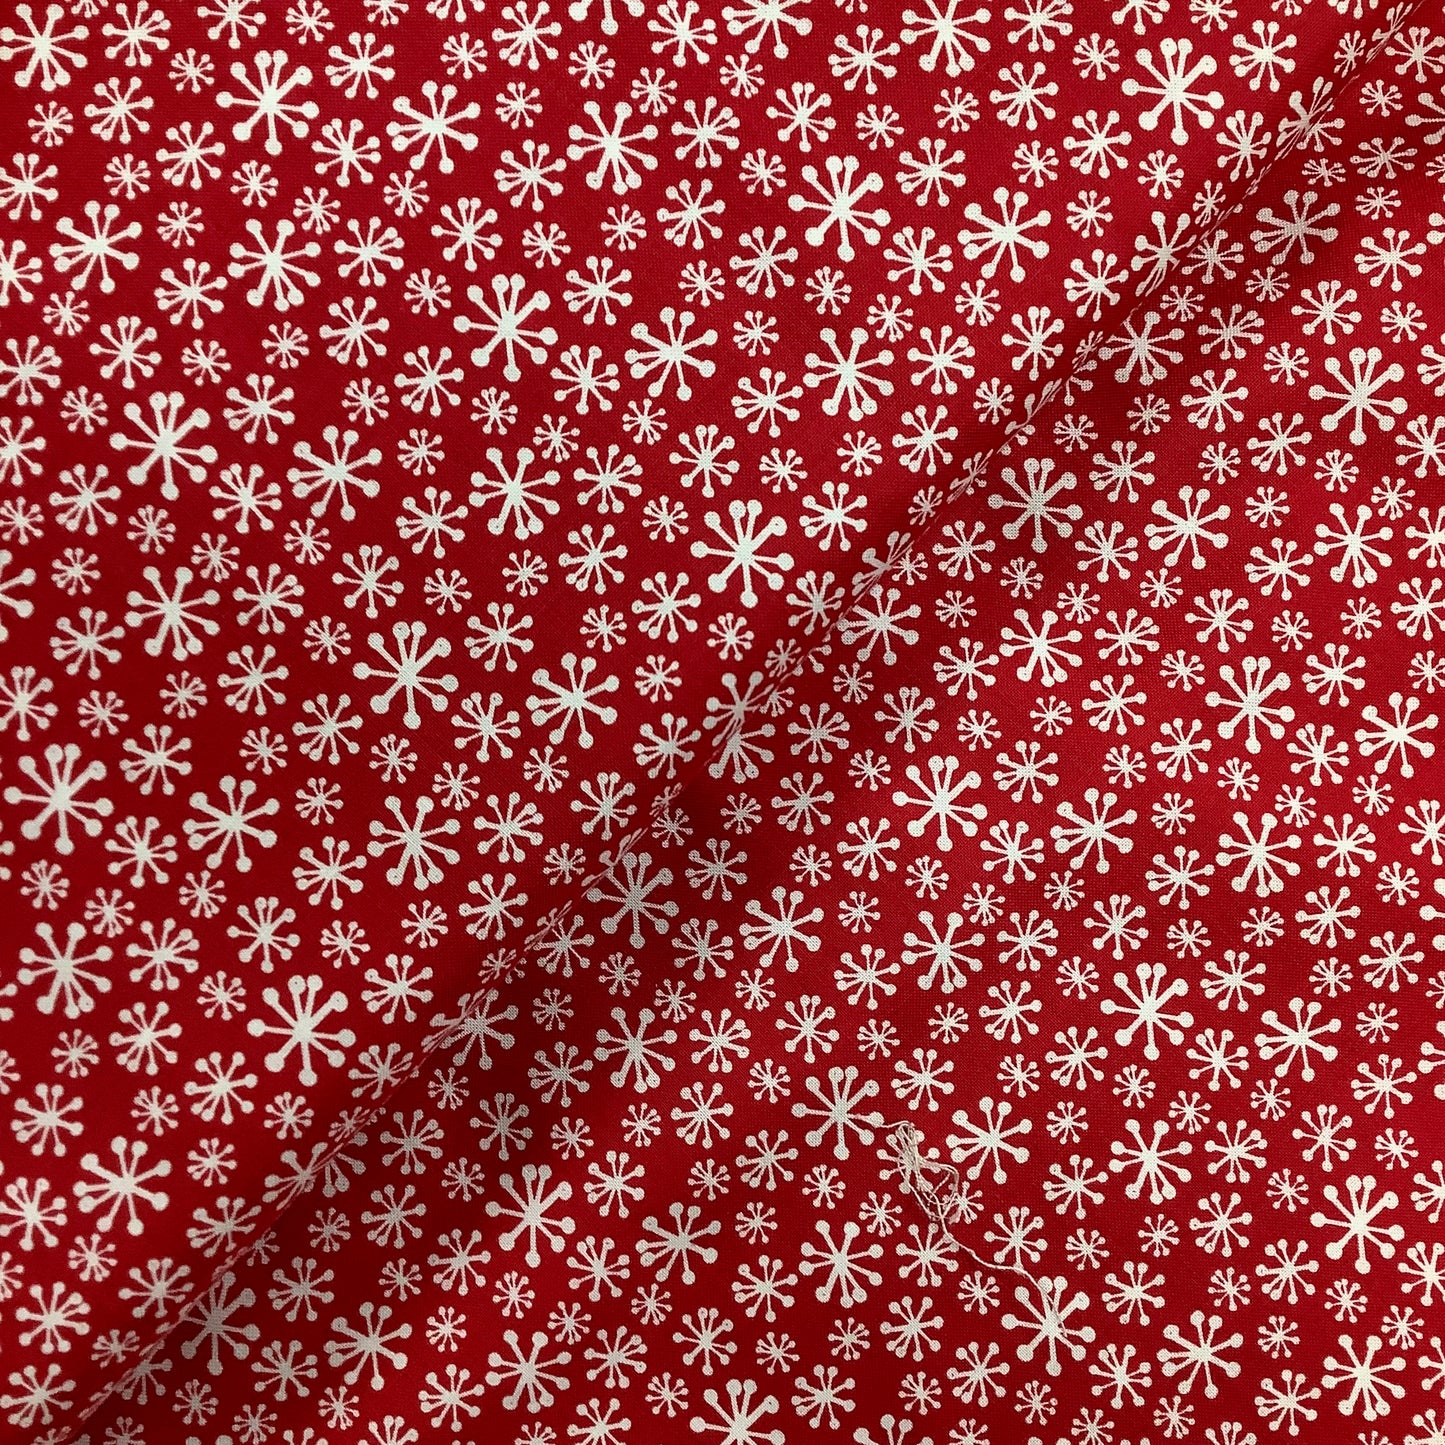 Blend Cool Yule White Snowflakes on Red Christmas 100% Premium Cotton Fabric 114.114.03.2